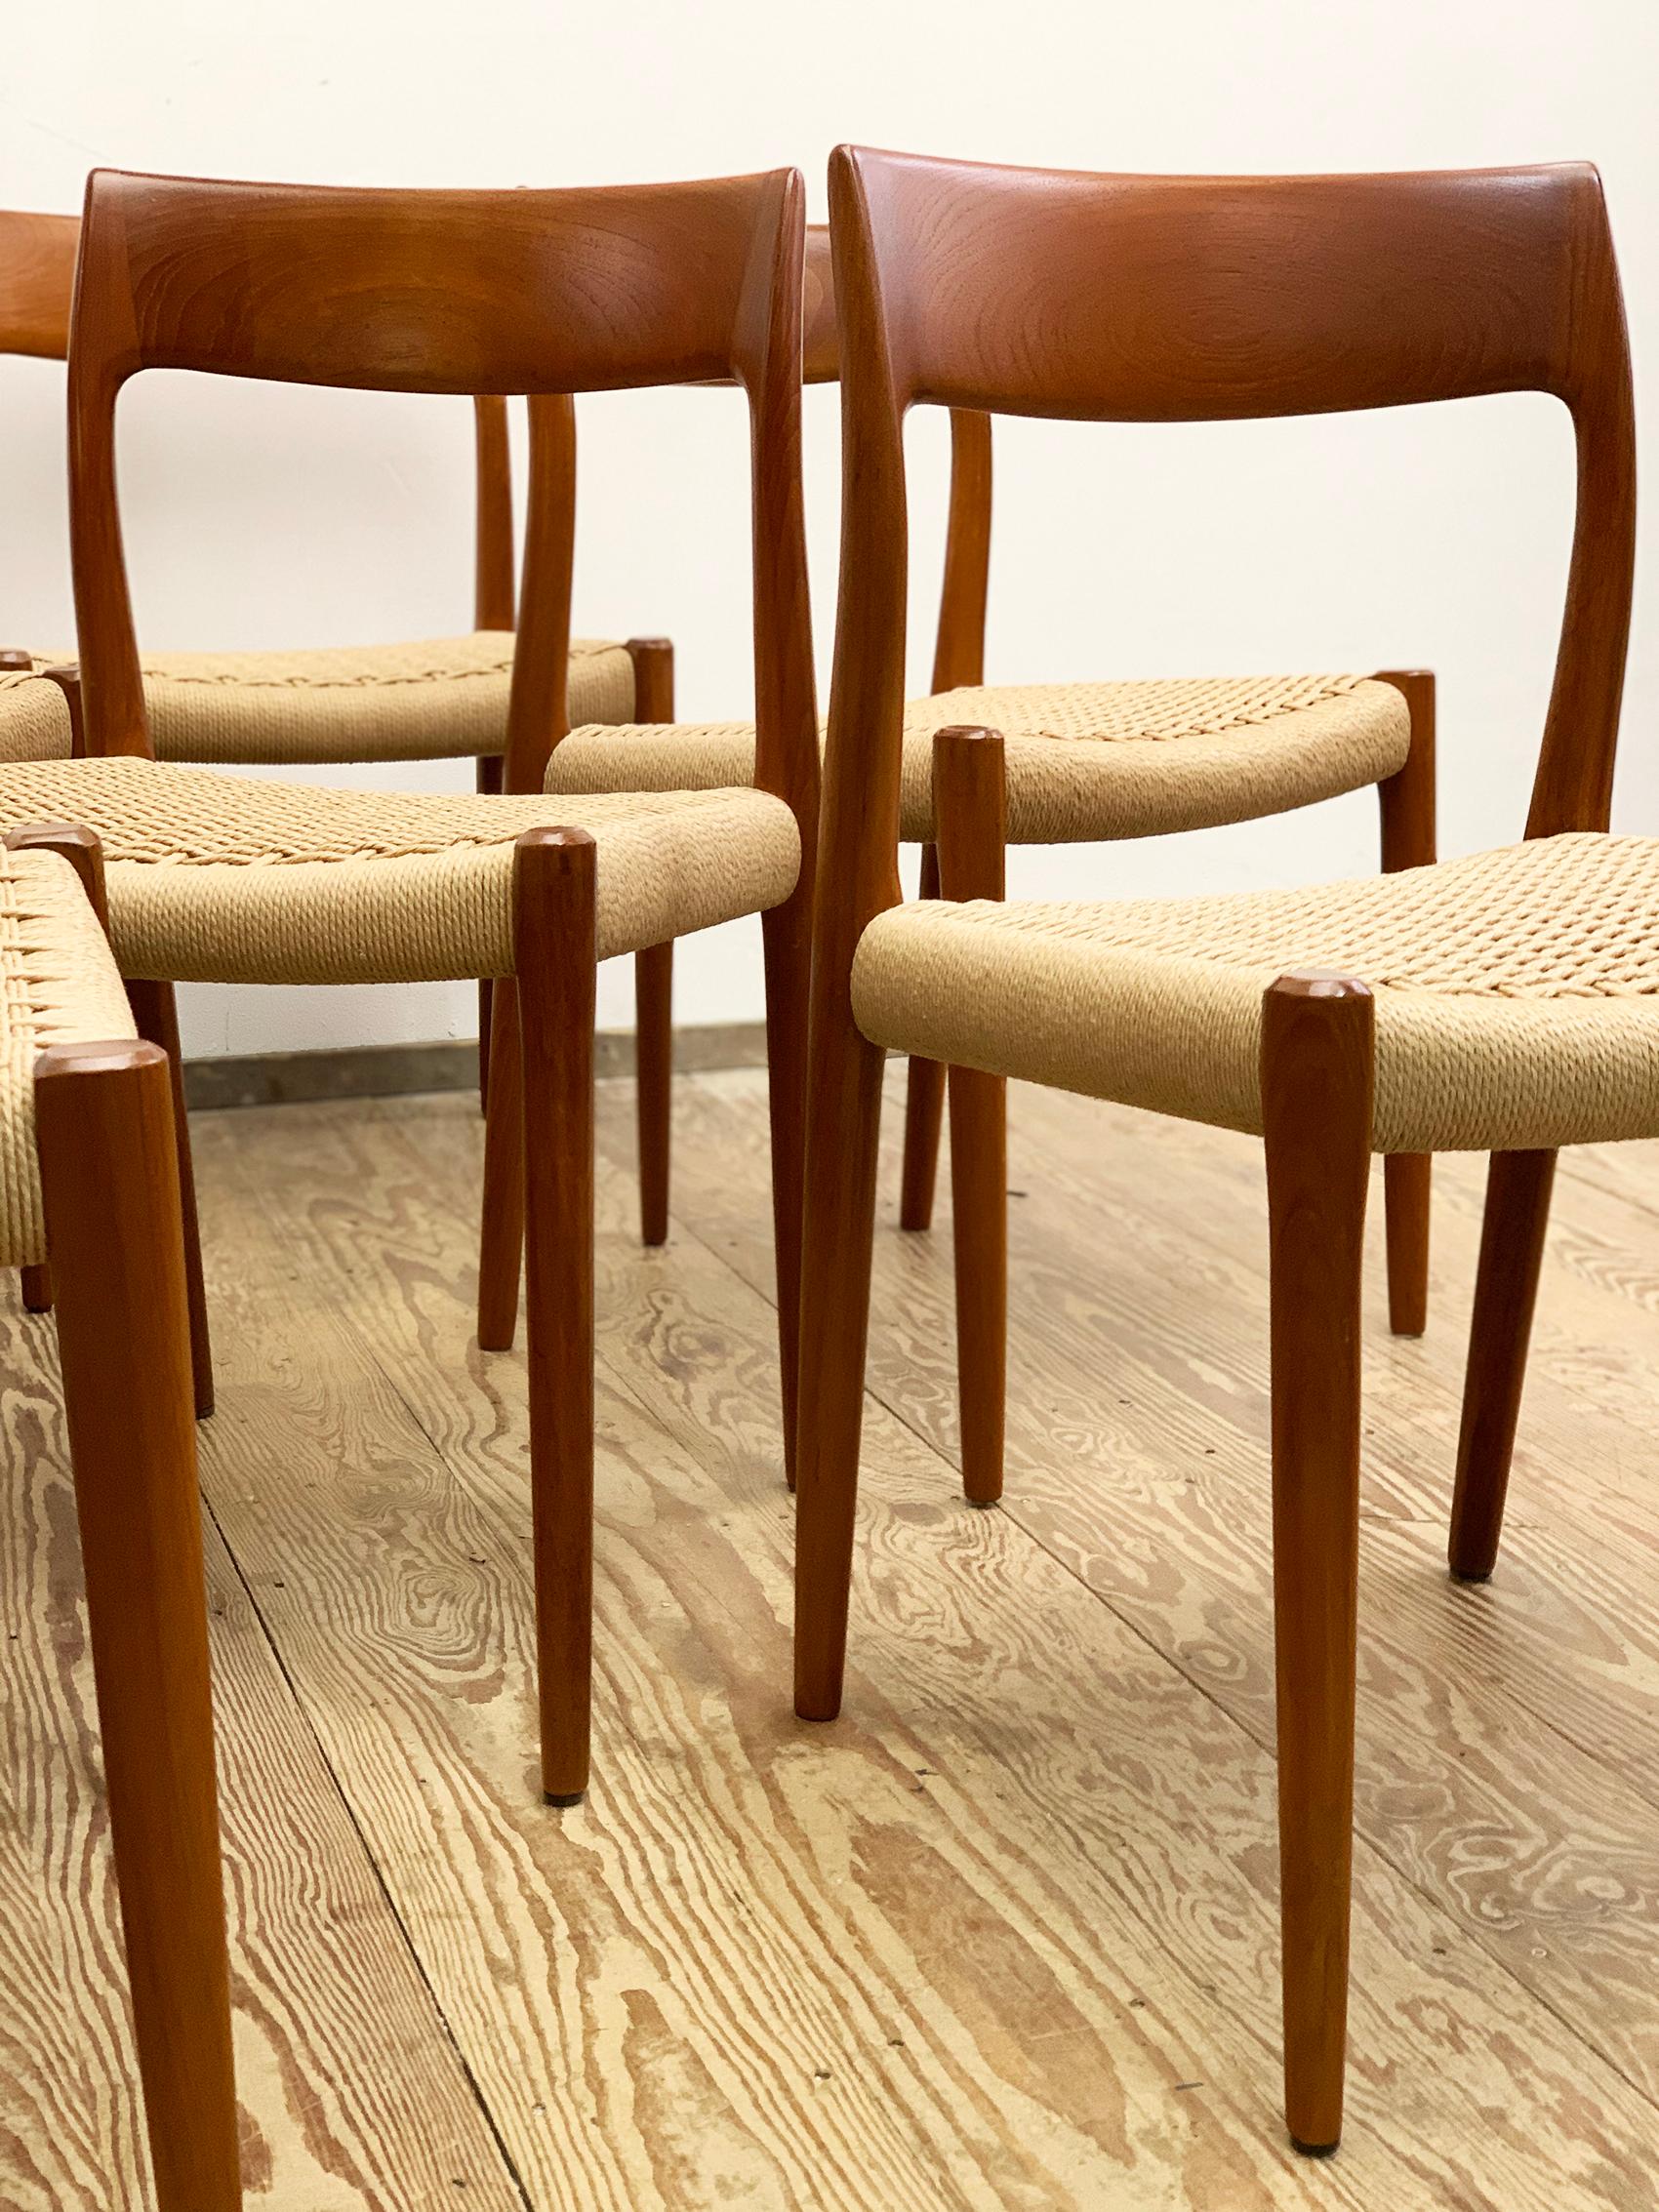 Mid-20th Century Midcentury Teak Dining Chairs #77 by Niels O. Møller for J. L. Moller, Set of 8